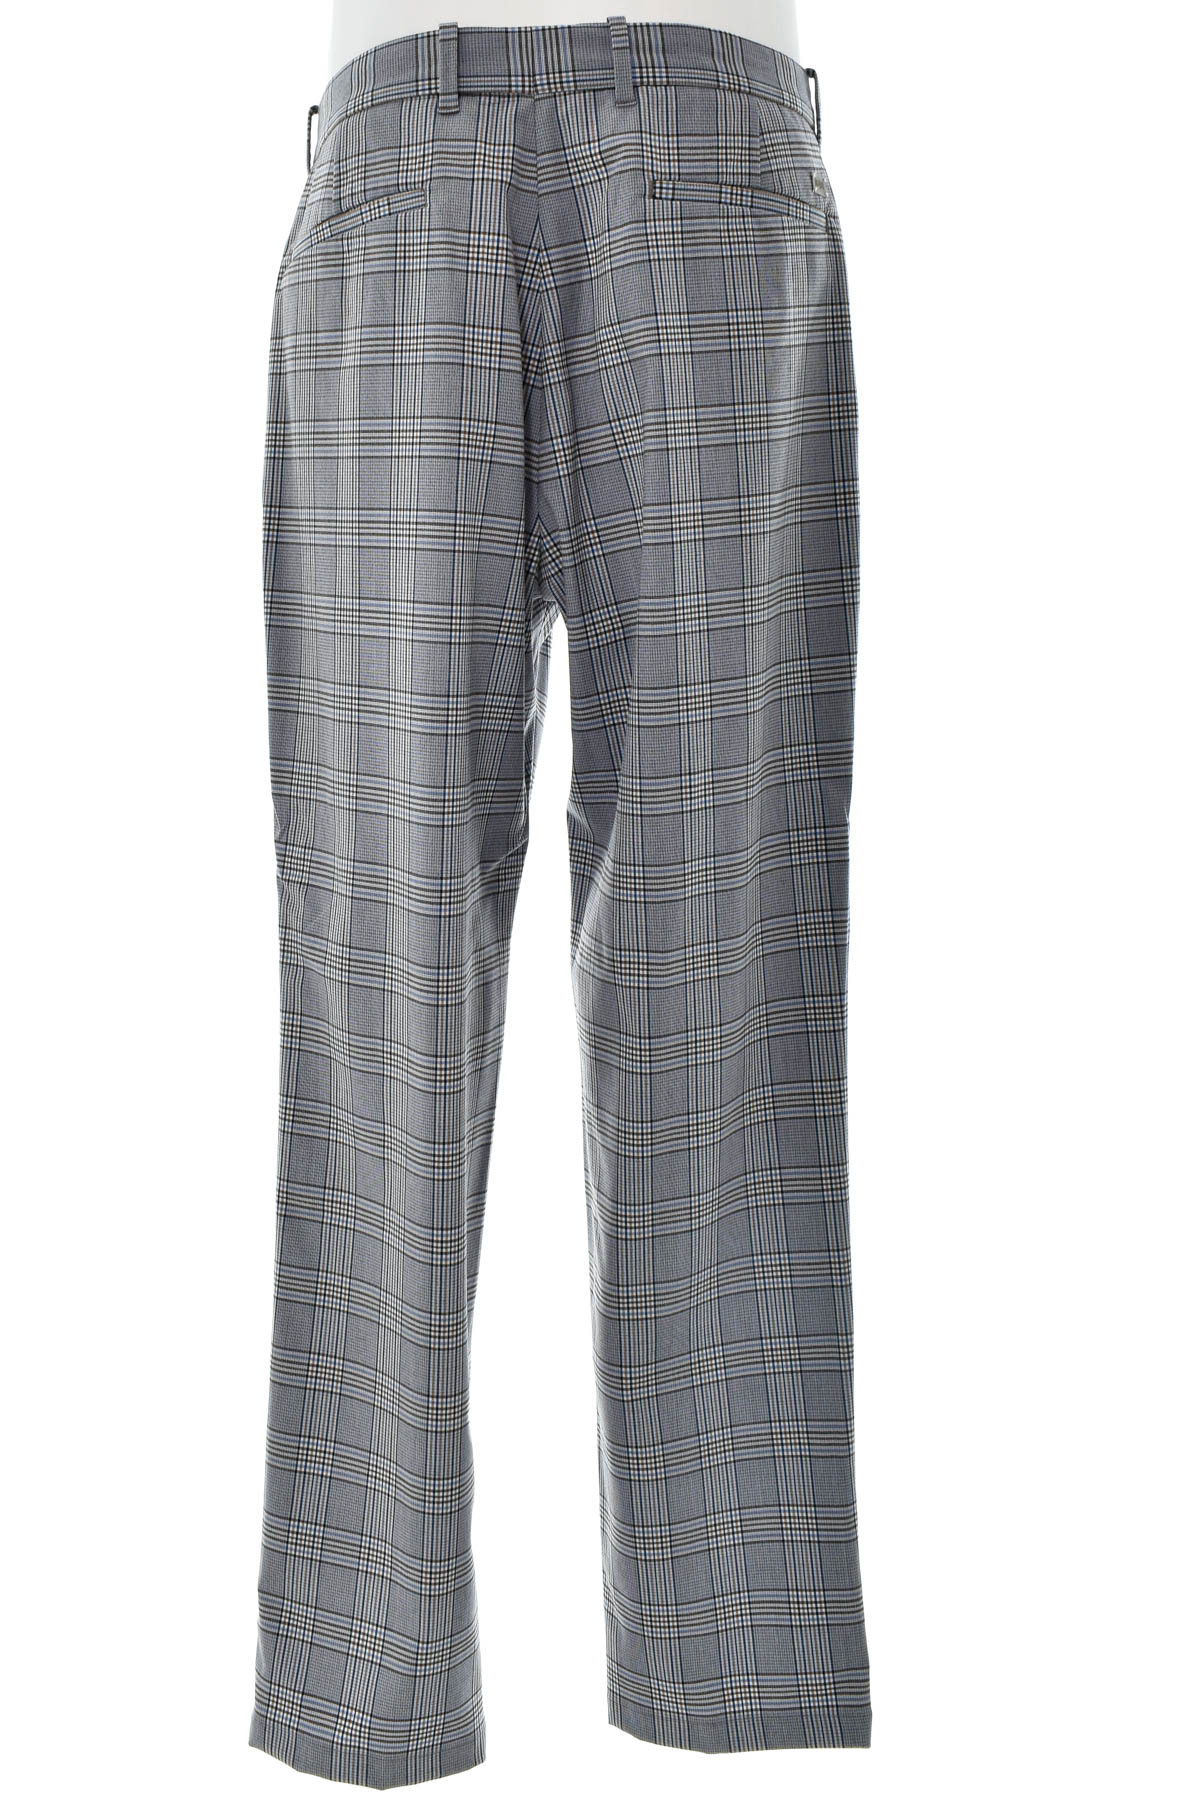 Men's trousers - S.Oliver - 1